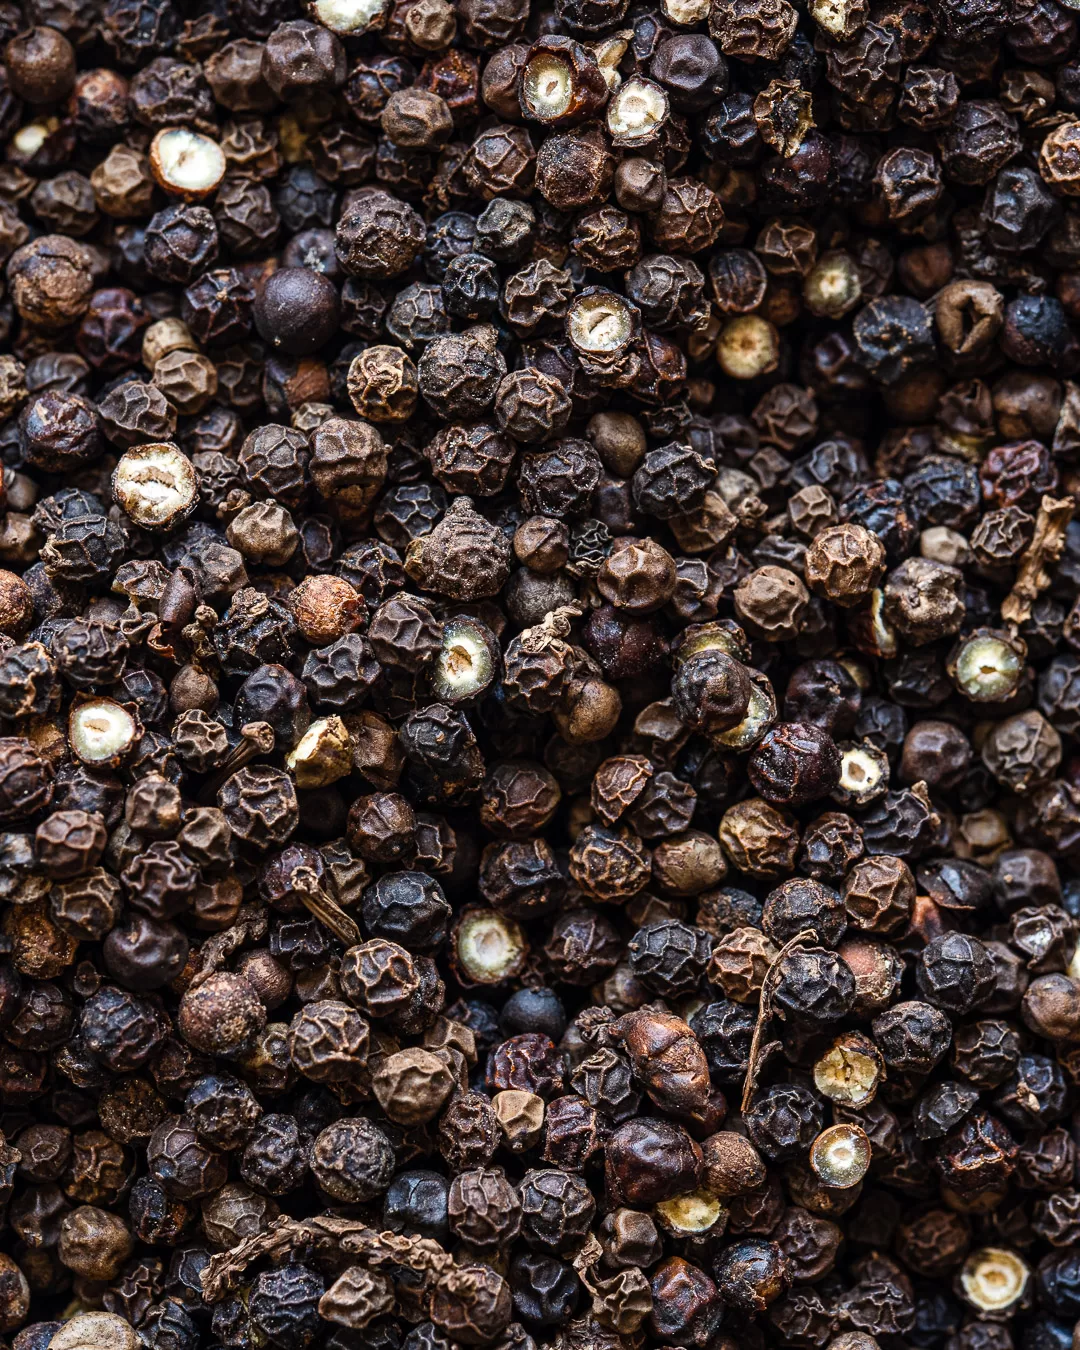 Marco food photography in Barcelona of peppercorns